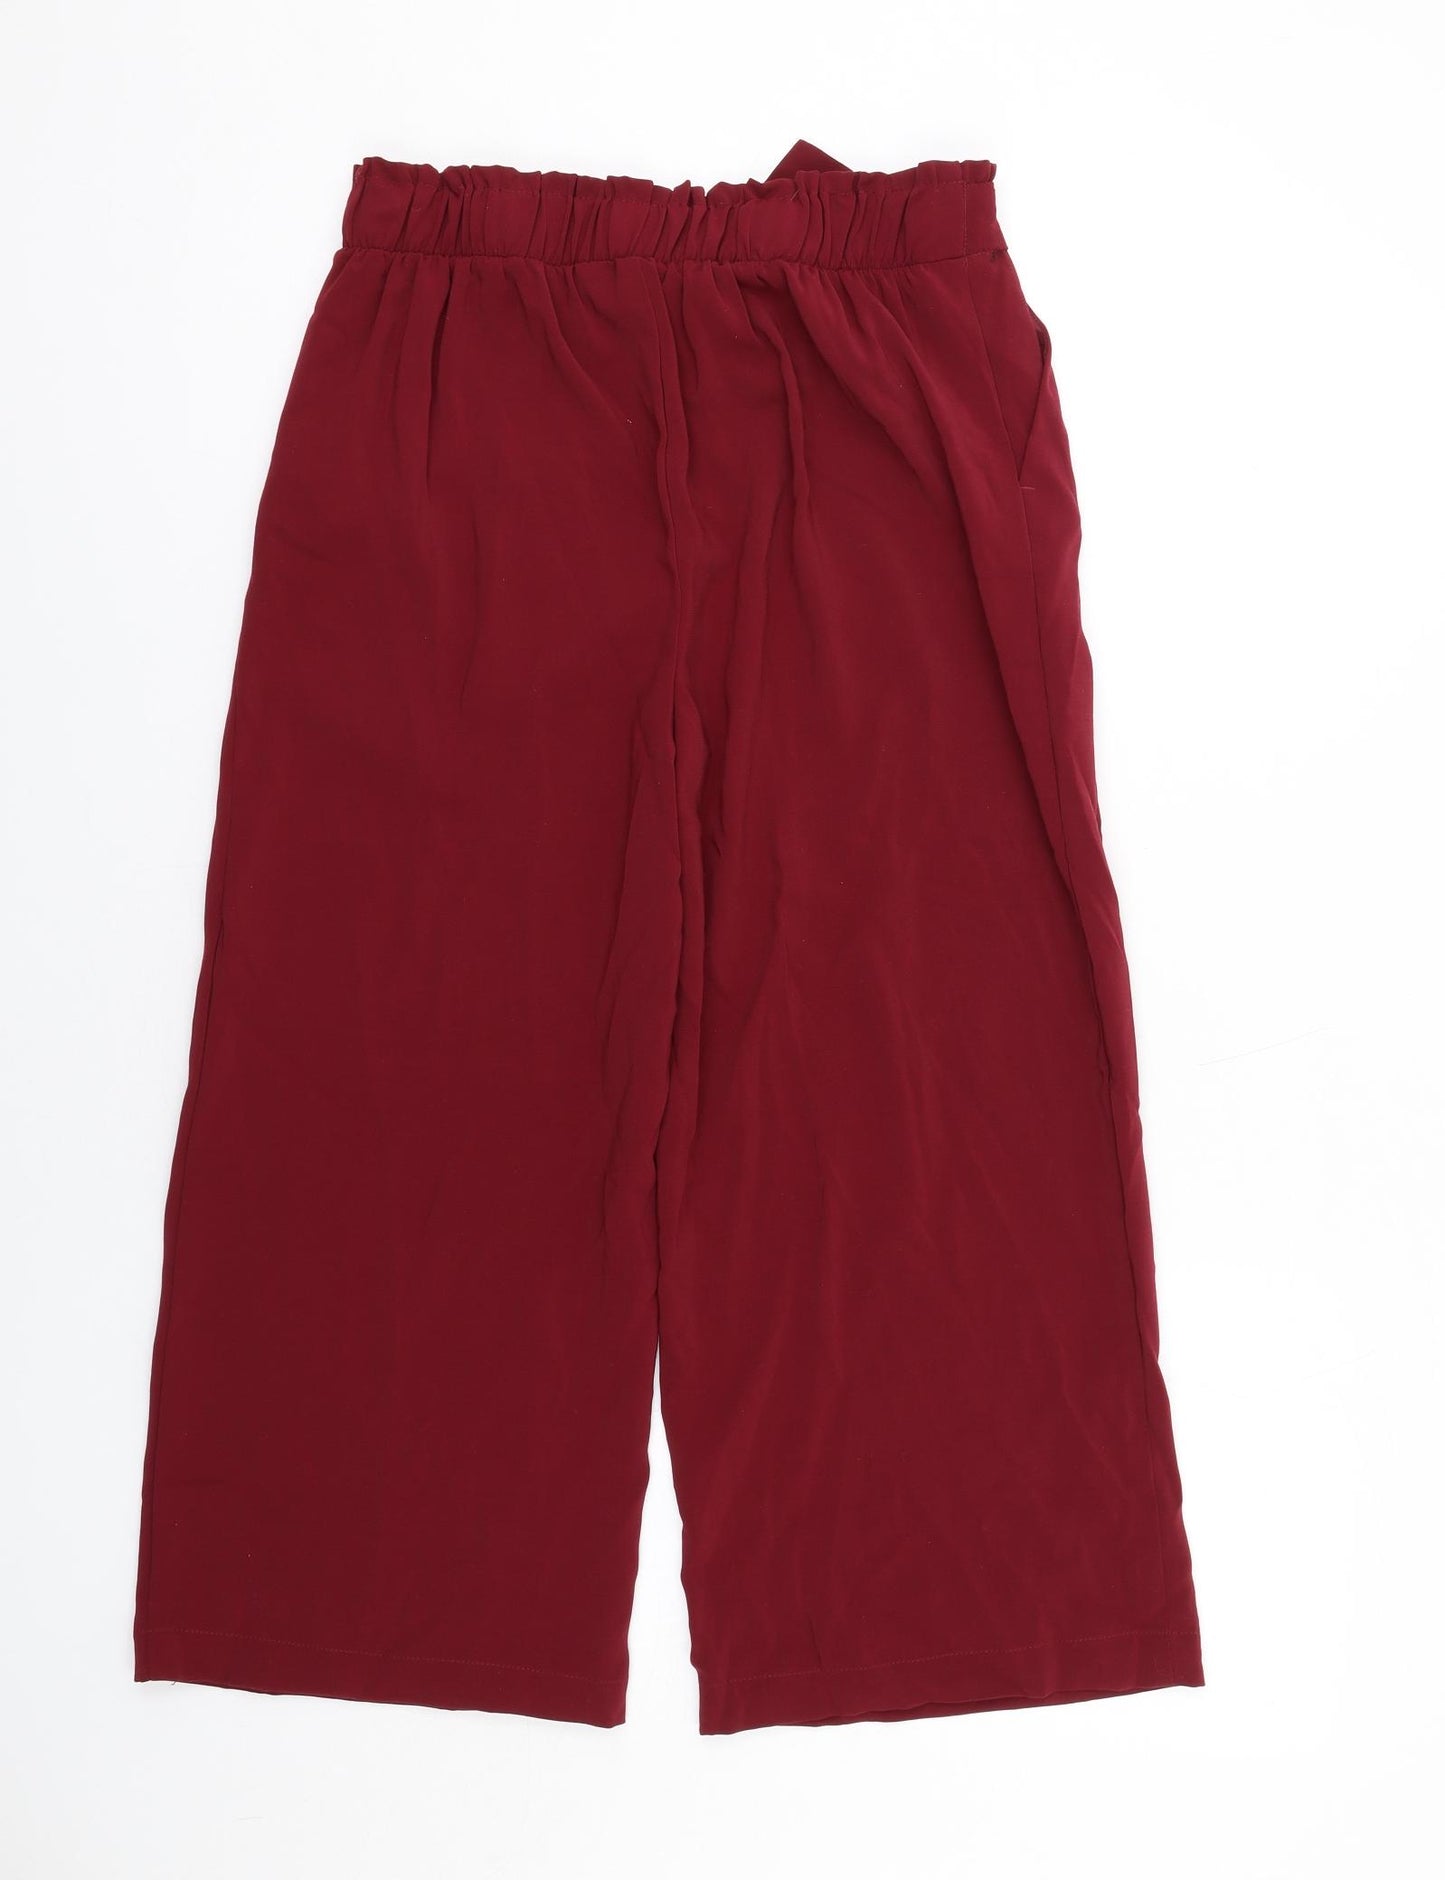 New Look Womens Red Polyester Capri Trousers Size 10 L24 in Regular Tie